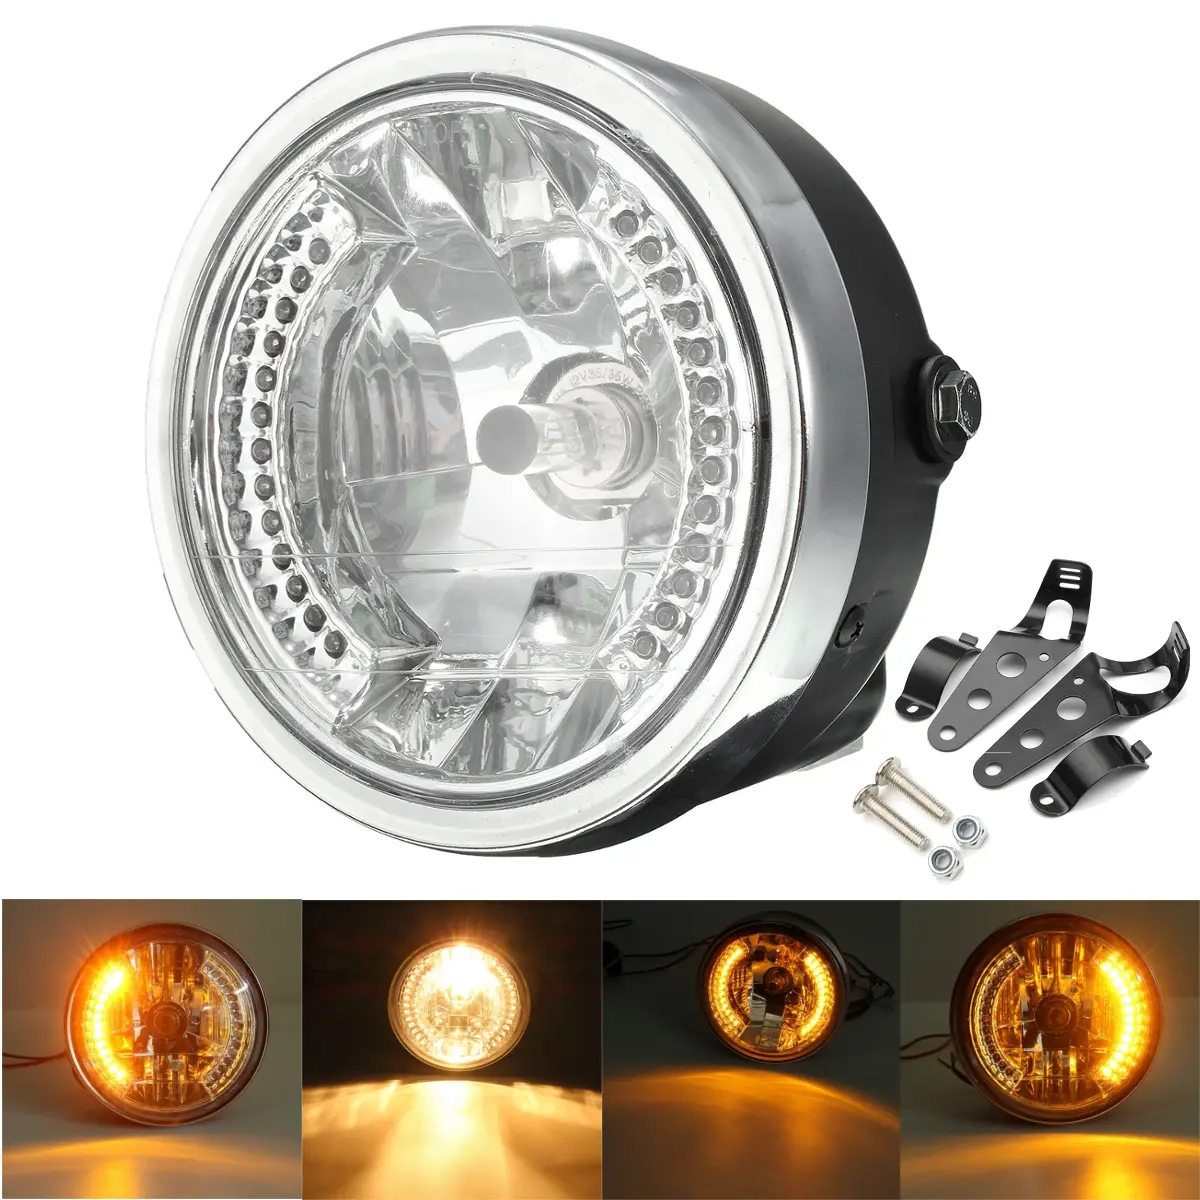 Critical Often spoken Shadow 8 Inch Motorcycle Headlight With LED Turn Signal Indicators Bracket Sale -  Banggood USA Mobile-arrival notice